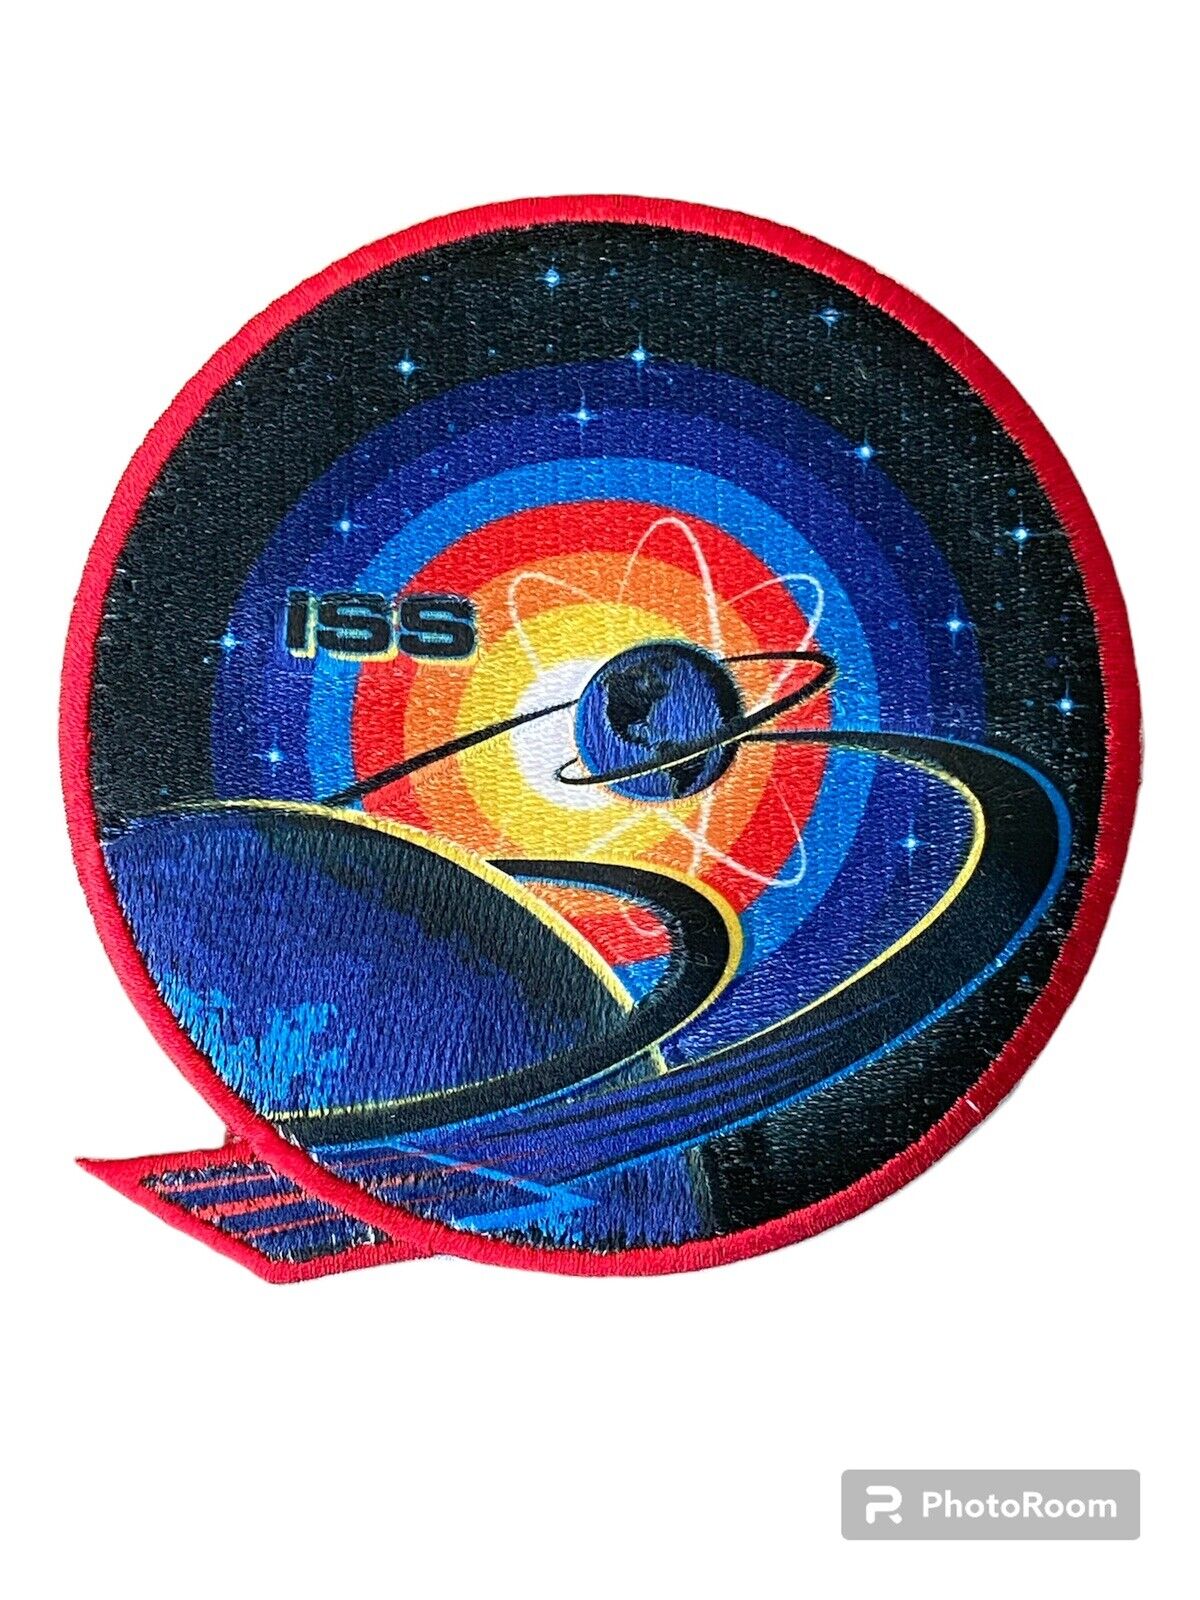 Authentic Expedition 63 -NASA SPACEX ISS Mission- A-B Emblem SPACE PATCH W/Names